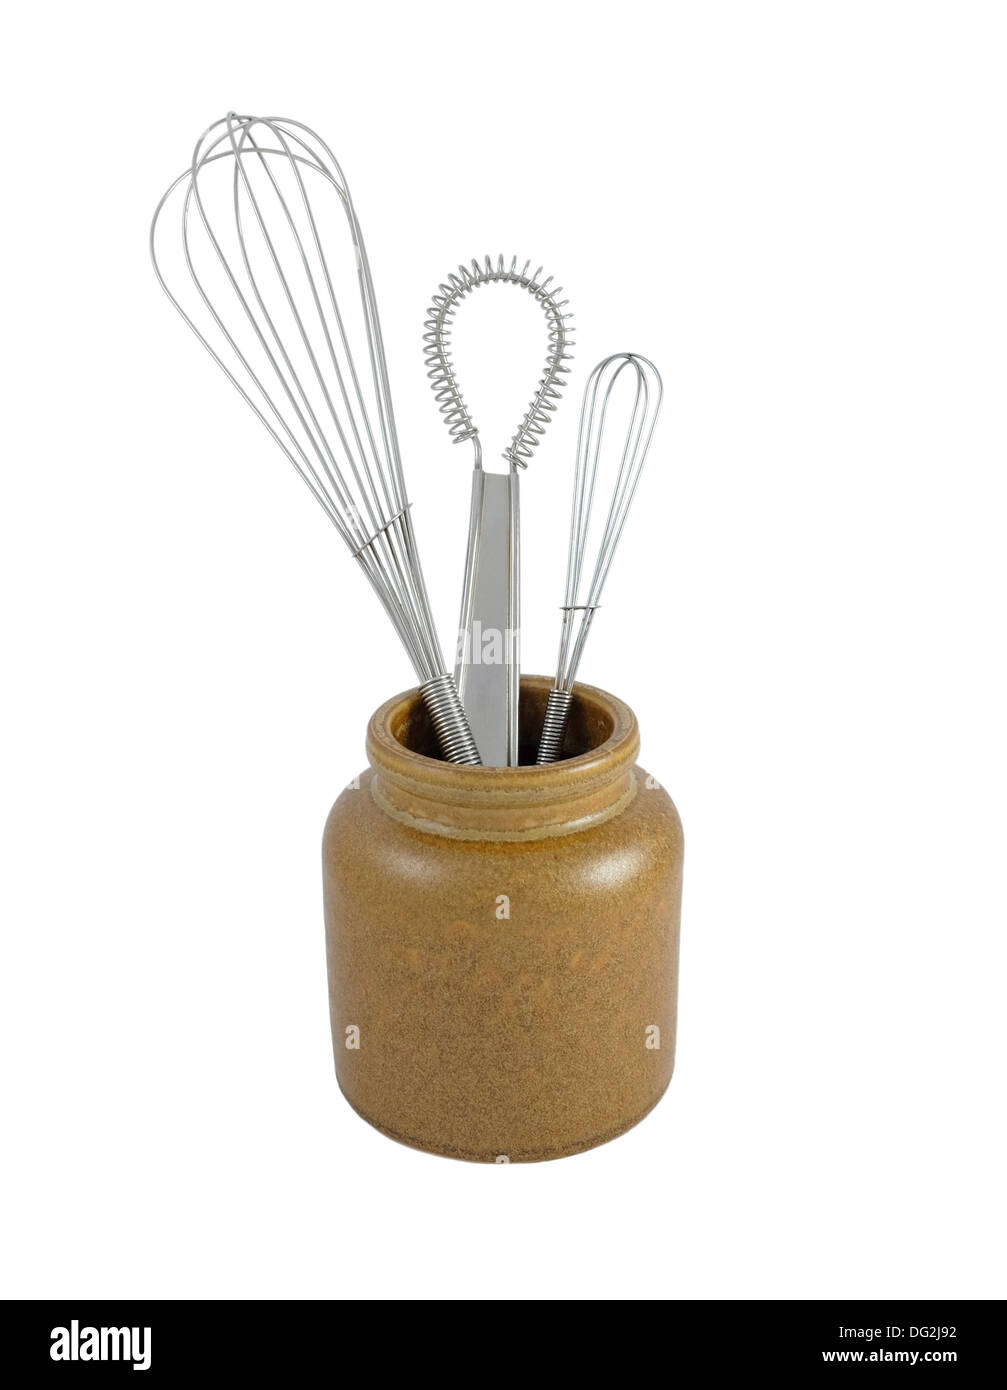 https://c8.alamy.com/comp/DG2J92/three-metal-whisks-in-a-brown-ceramic-jar-isolated-on-a-white-background-DG2J92.jpg